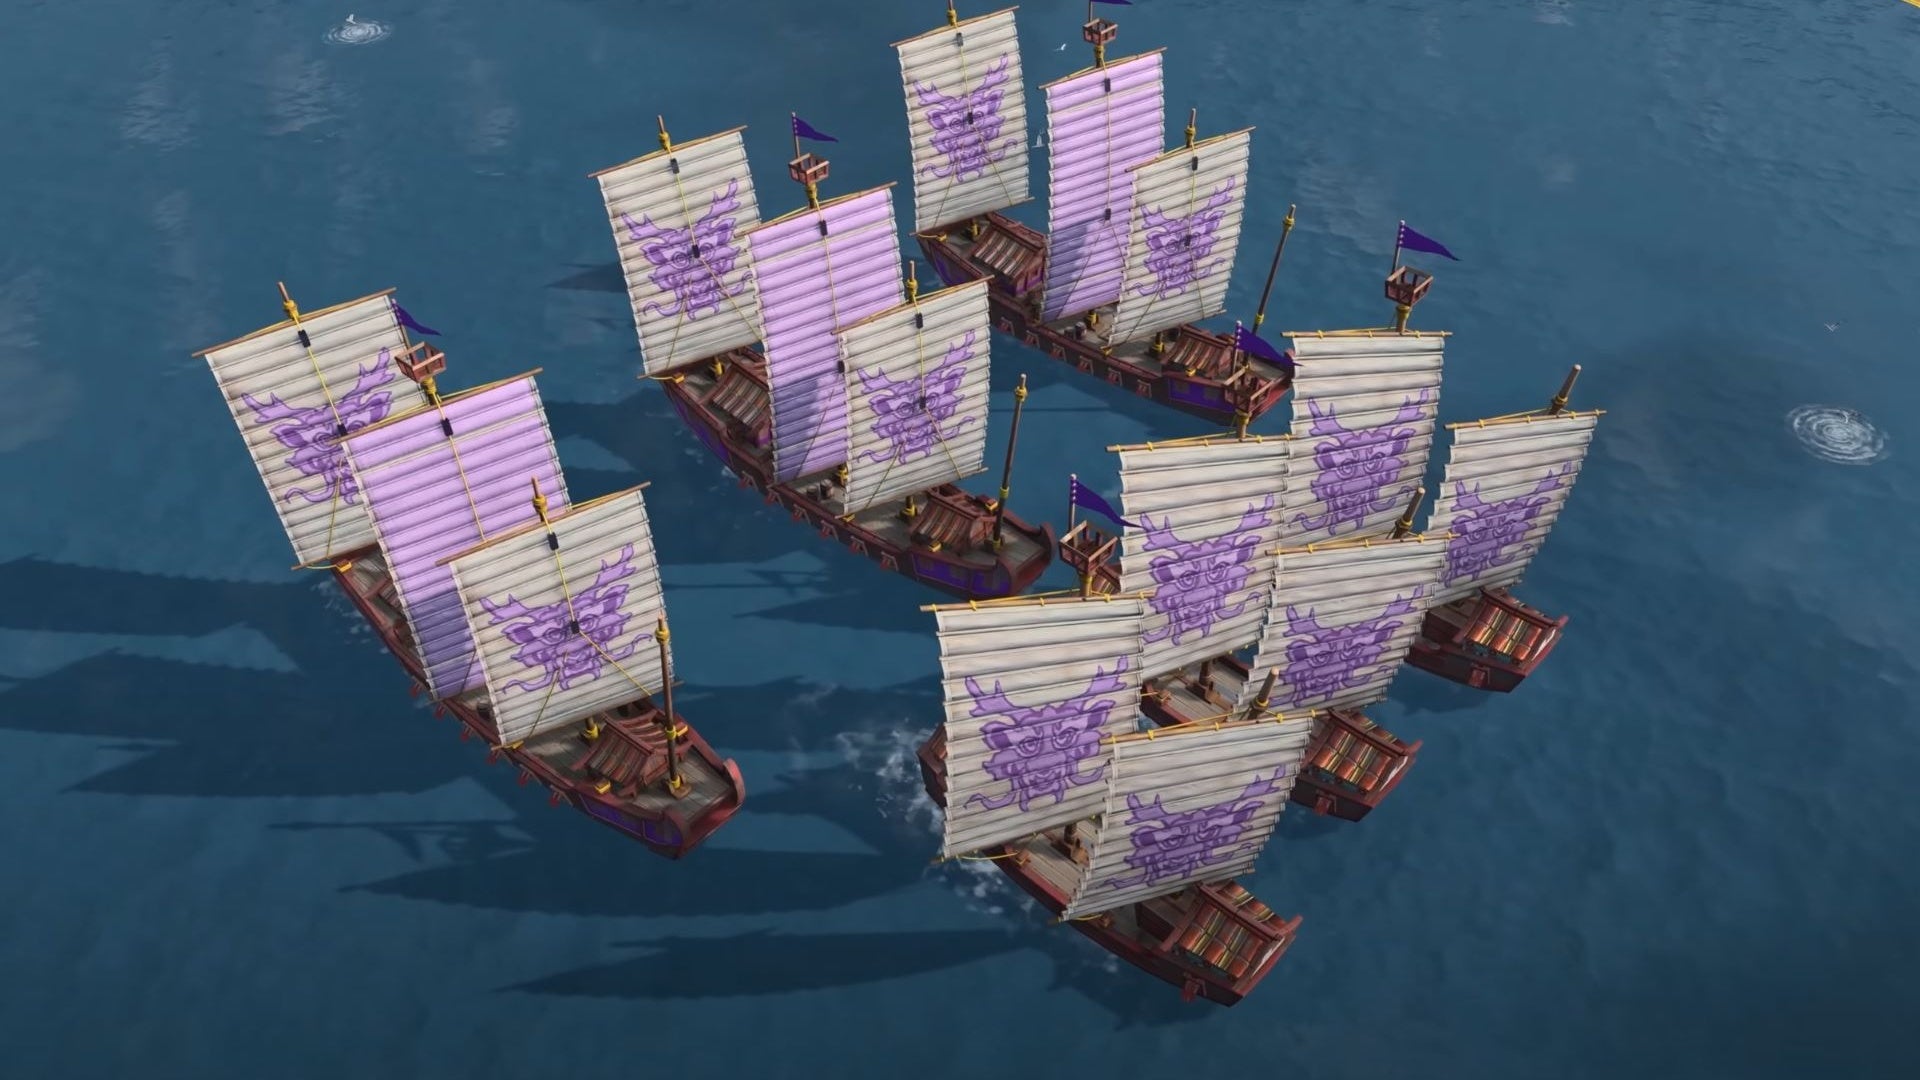 Age Of Empires IV's season two update, Map Monsters, arrives on July 12th, 2022.